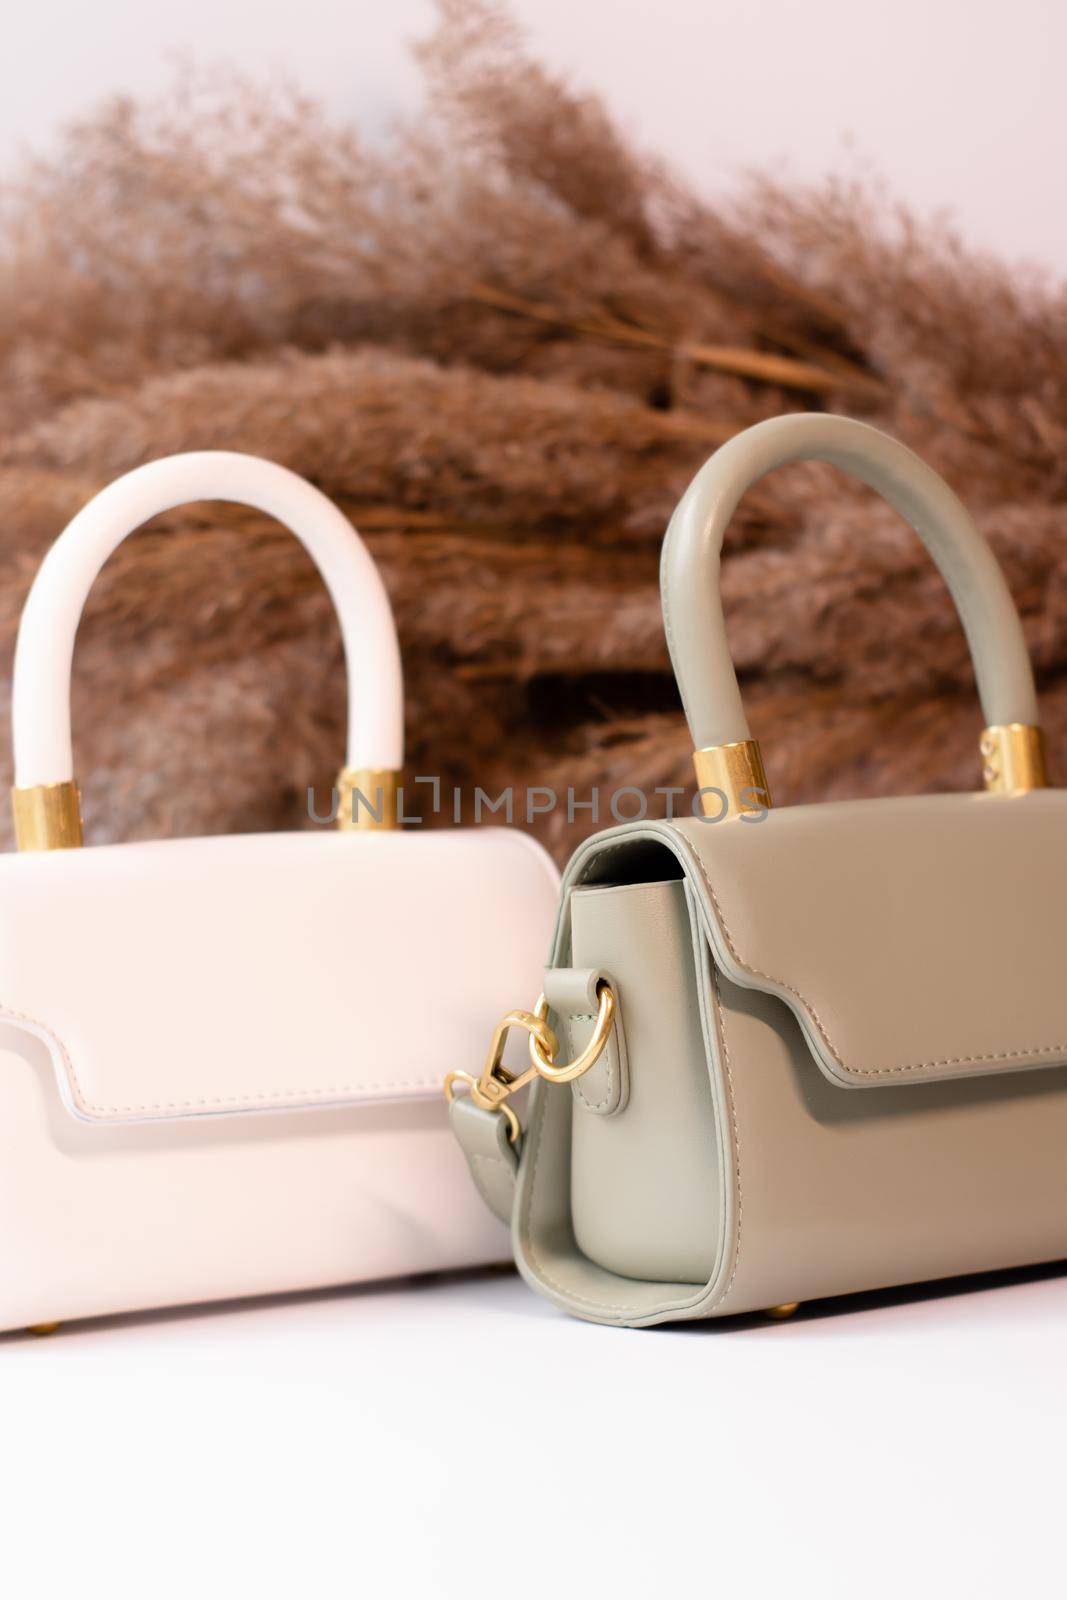 fashion photo of two purse. beige and green woman handbag with gold chain on background of pampas grass or dried flowers. isolated on white background. Product composition photography by oliavesna